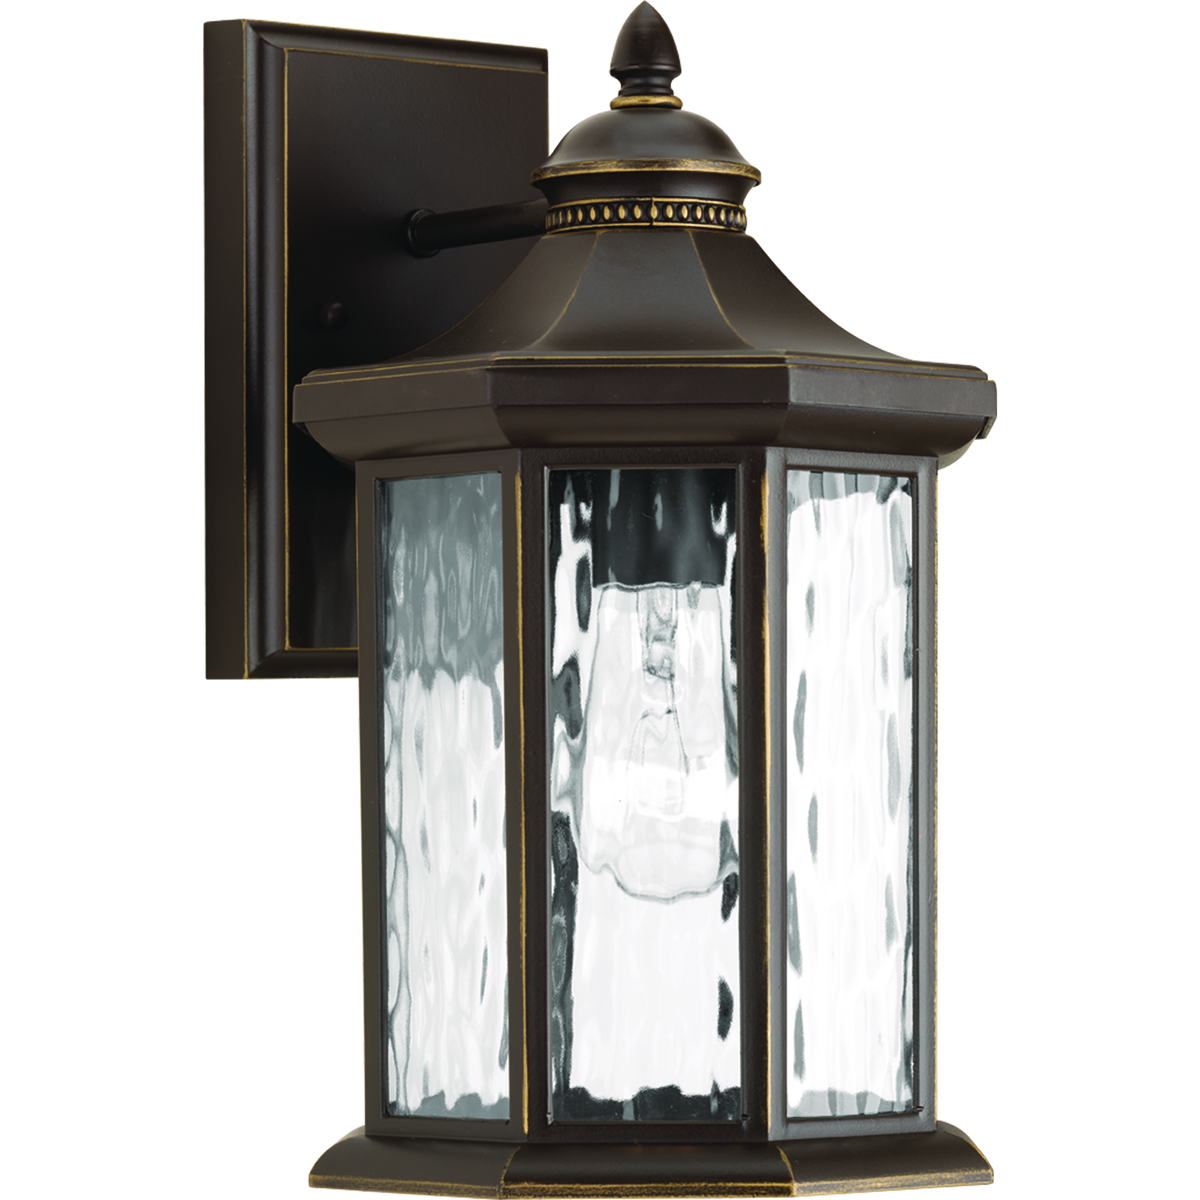 The one-light medium wall lantern in the Edition collection features distinctive octagonal shape for classic styling. Clear water glass elements are accented by a Antique Bronze finish. Die-cast aluminum construction with a powder coat finish makes this a durable style for updating a home's curb appeal.